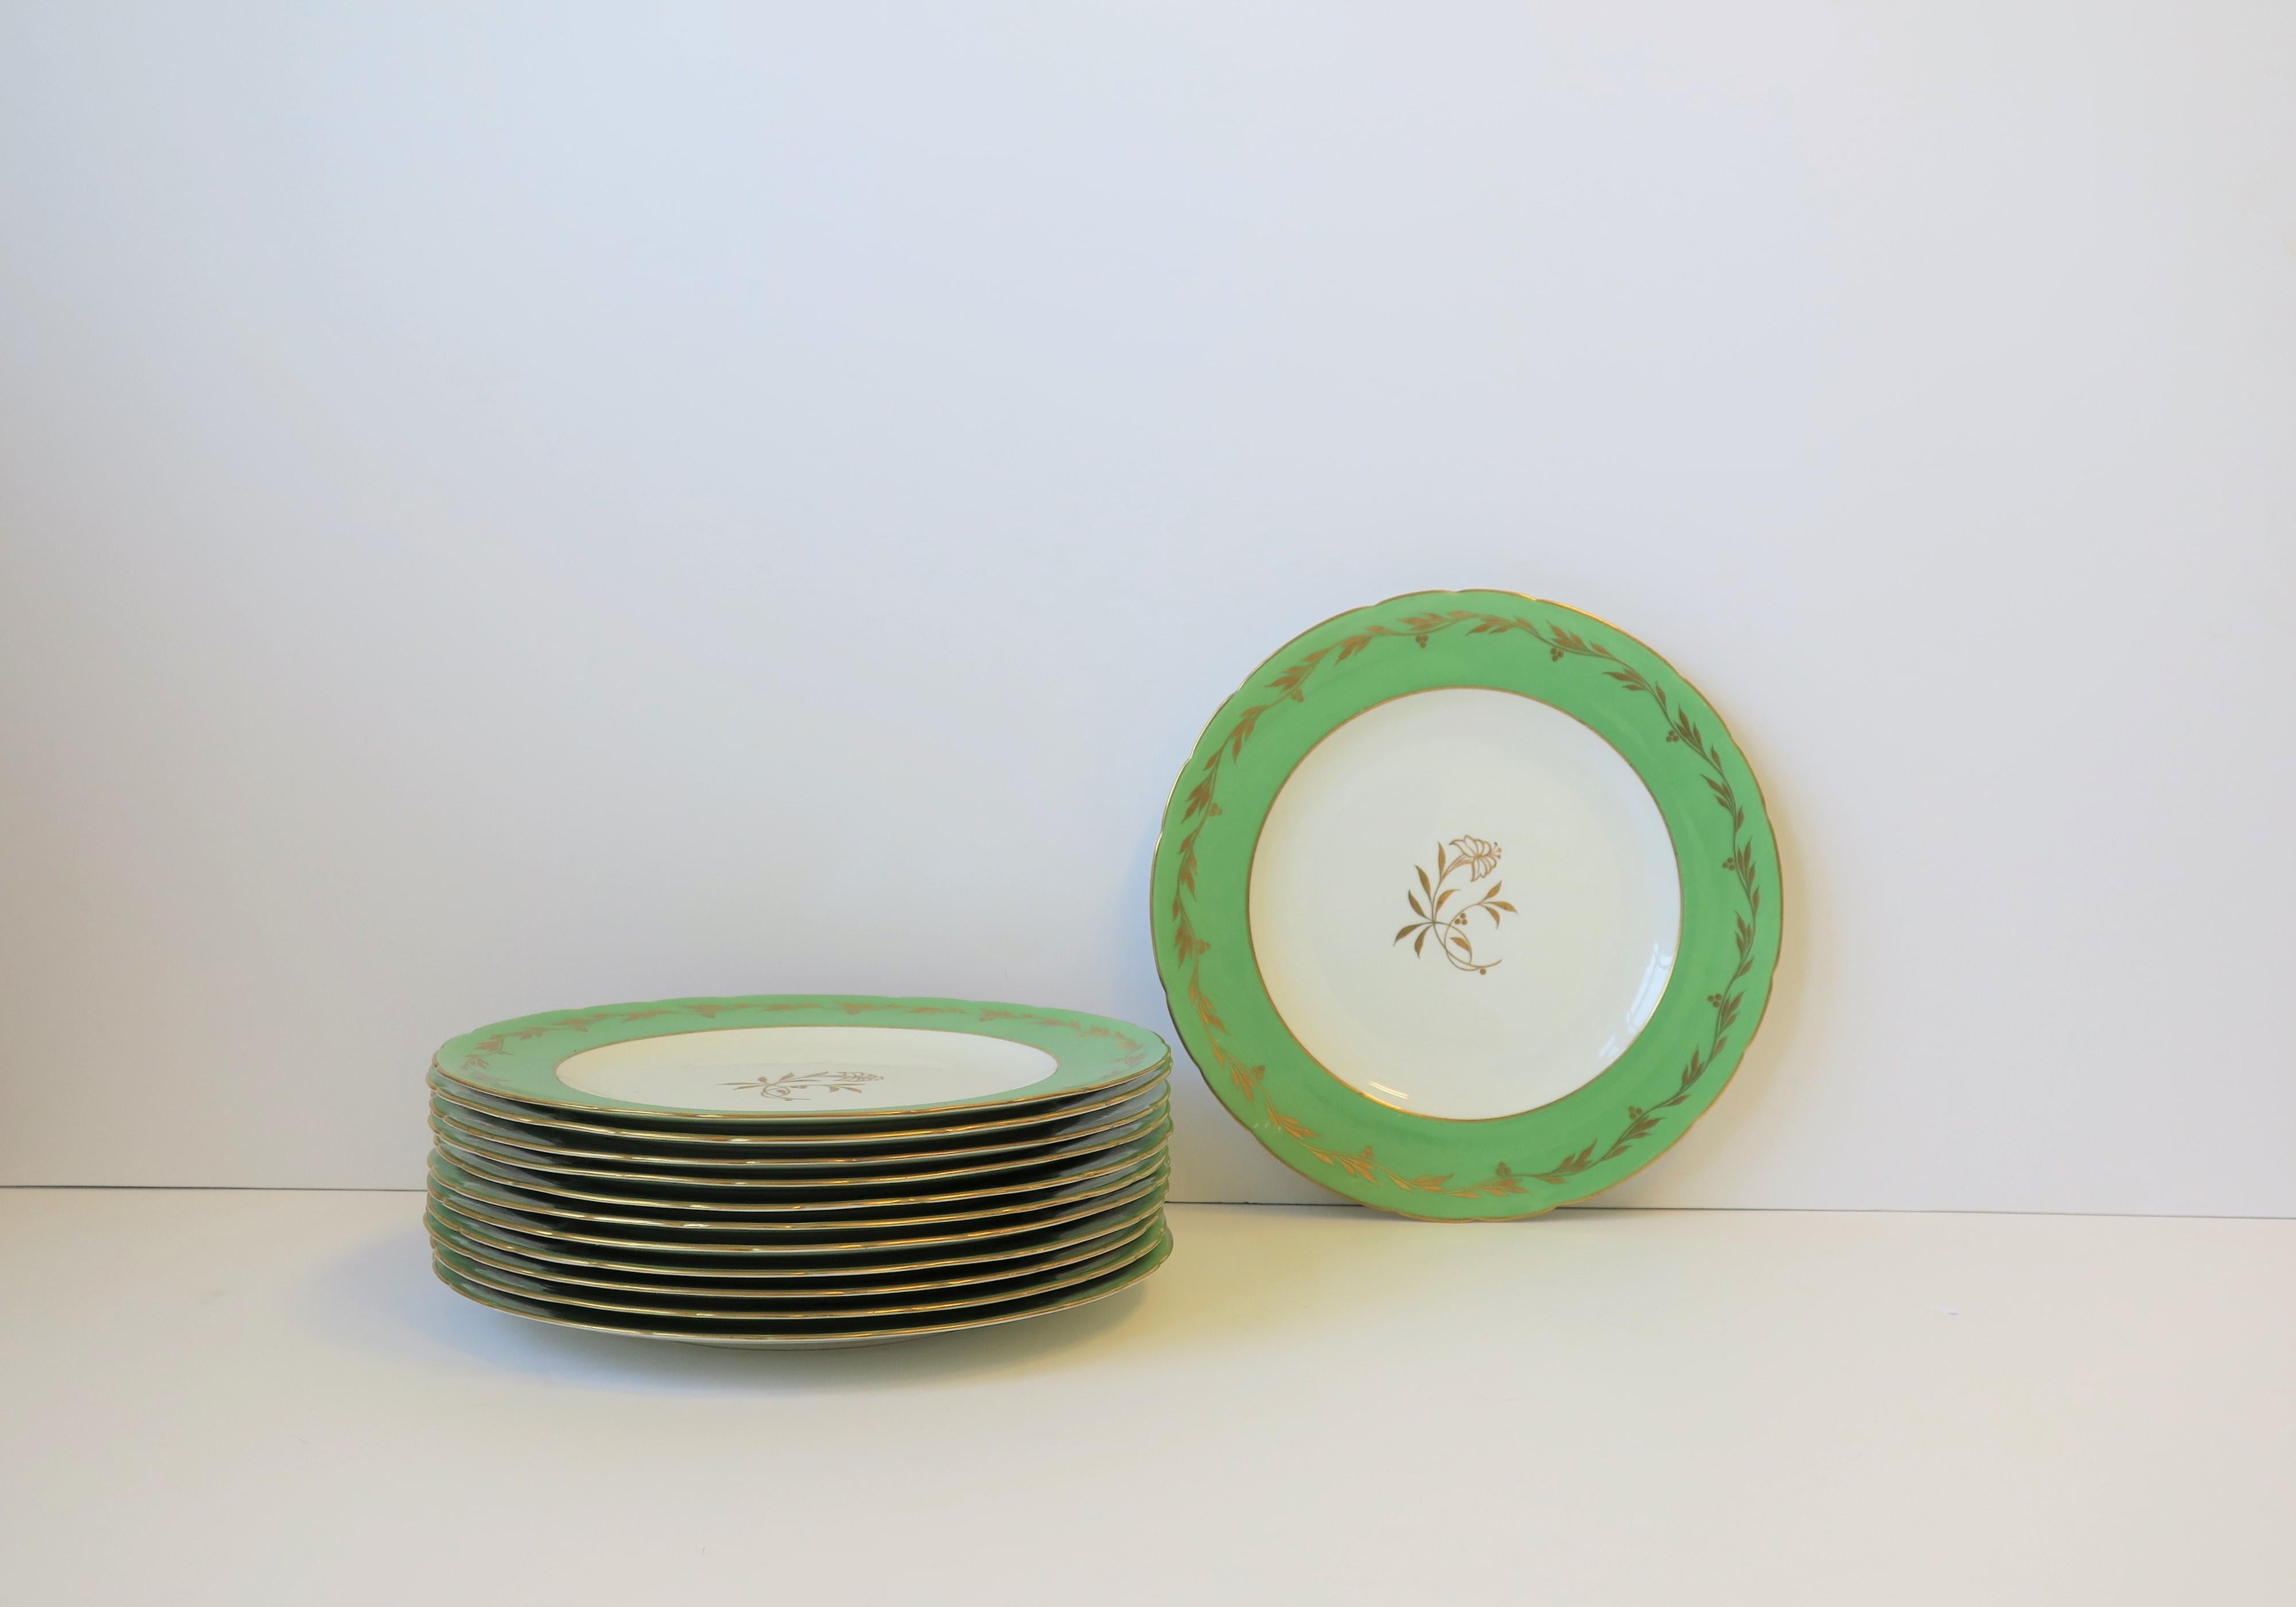 A beautiful set of 12 dinner plates made by Royal Crown Derby exclusively for iconic Tiffany & Co. New York, circa early-20th century, England. Plates are decorated with 22-karat gold, border in a 'spring' green or 'Kelly' green and gold leaf